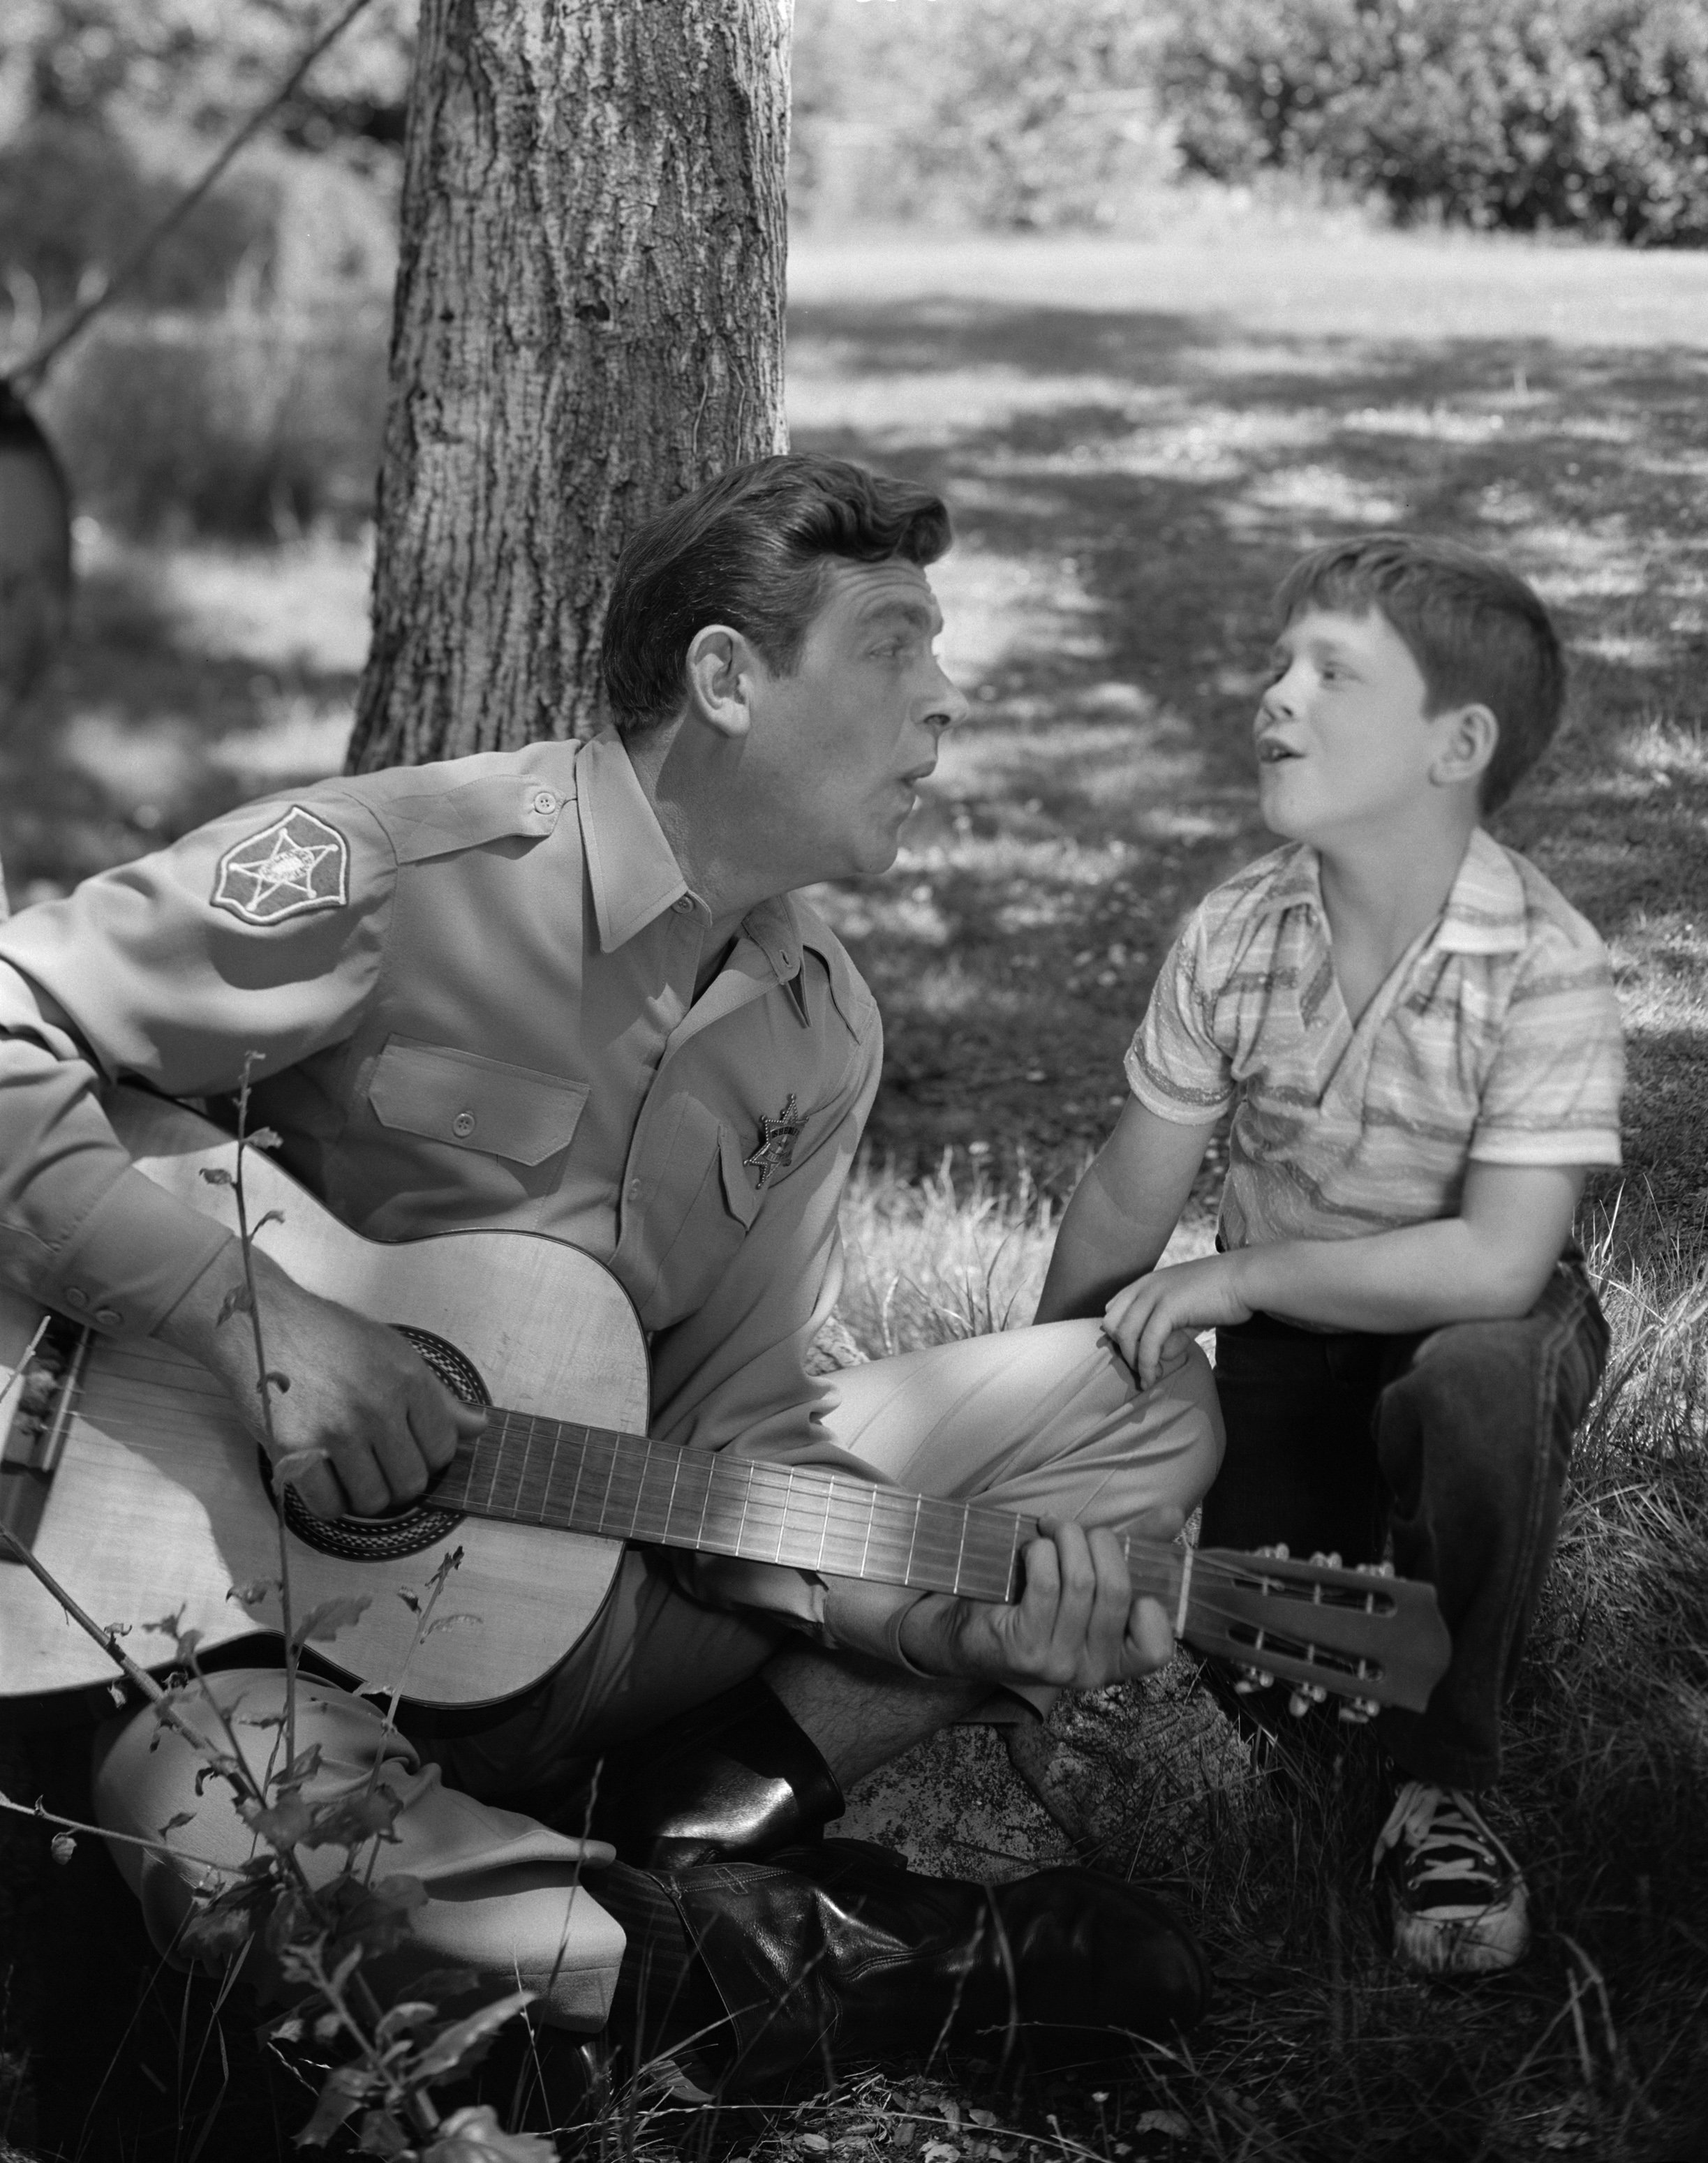 Andy Griffith, left, and Ron Howard in a scene from 'The Andy Griffith Show'